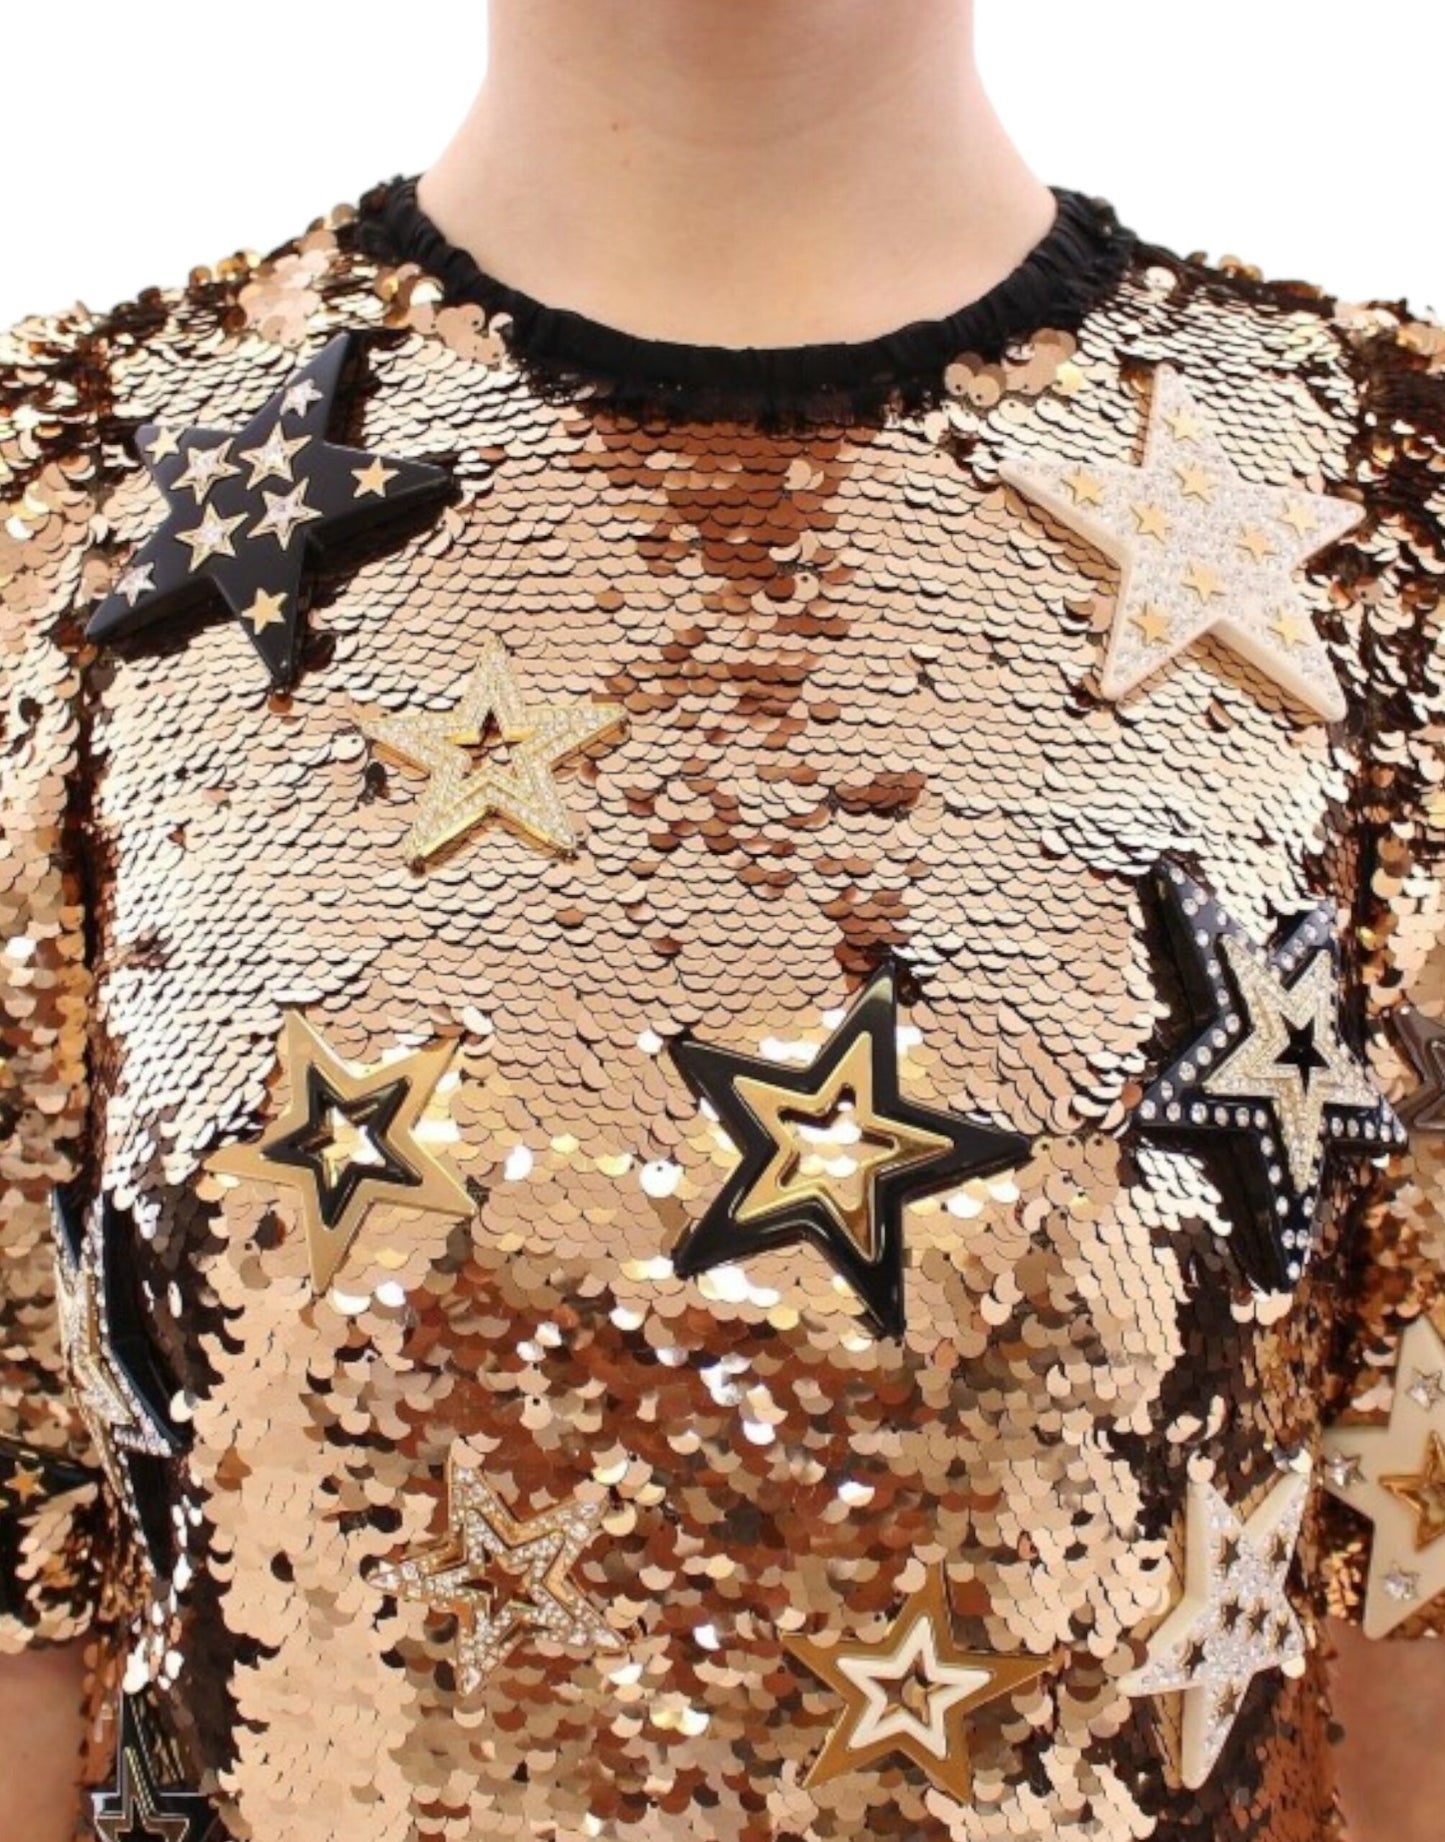 Exquisite Gold Sequined Star Sheath Dress